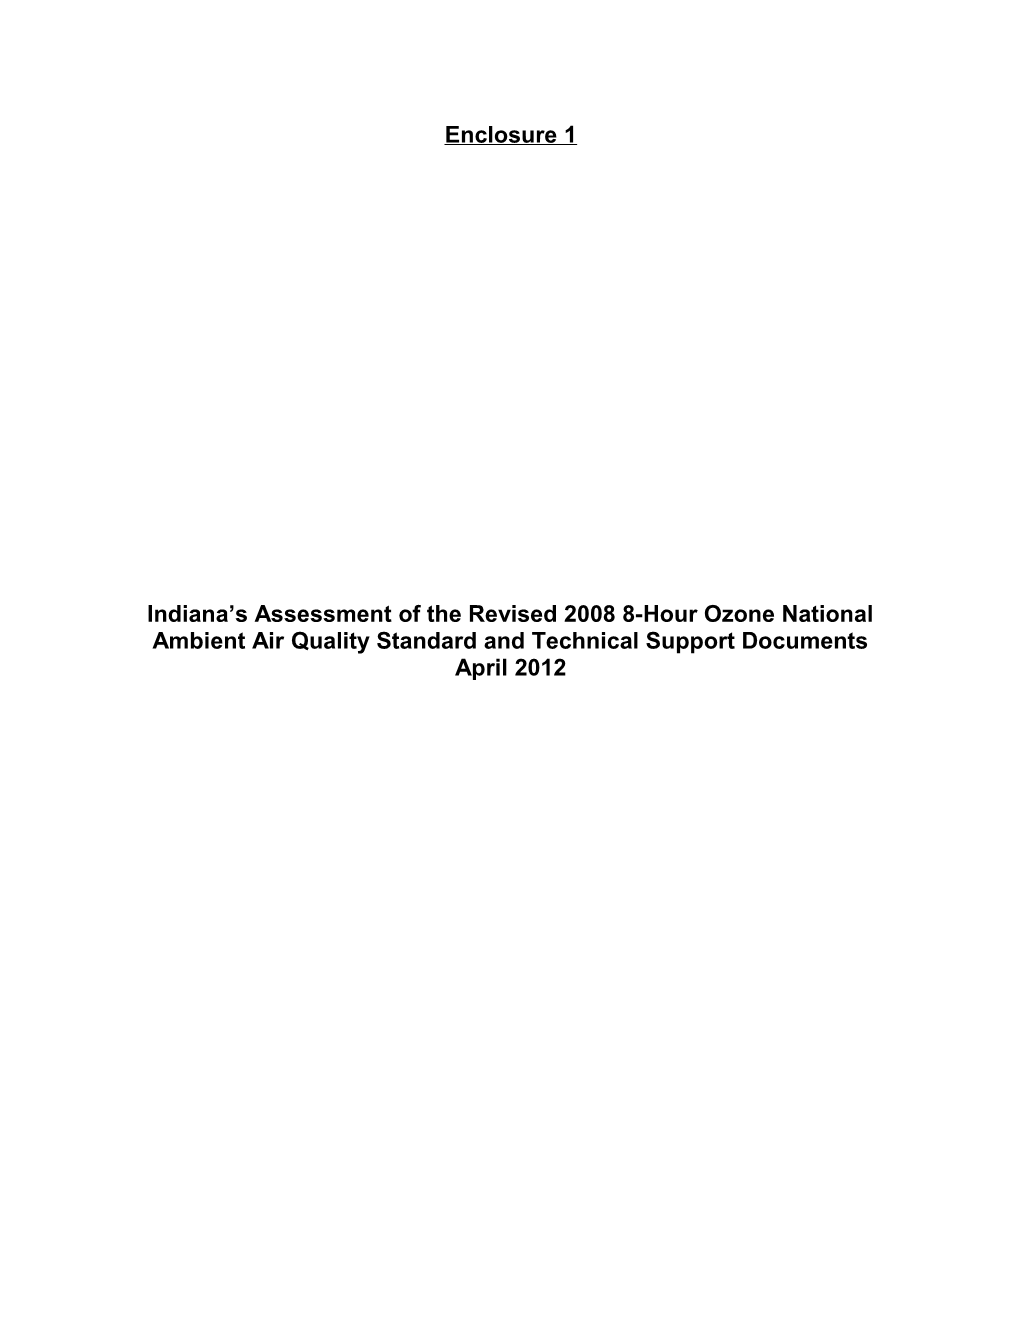 Indiana S Assessment of the Revised 2008 8-Hour Ozone National Ambient Air Quality Standard